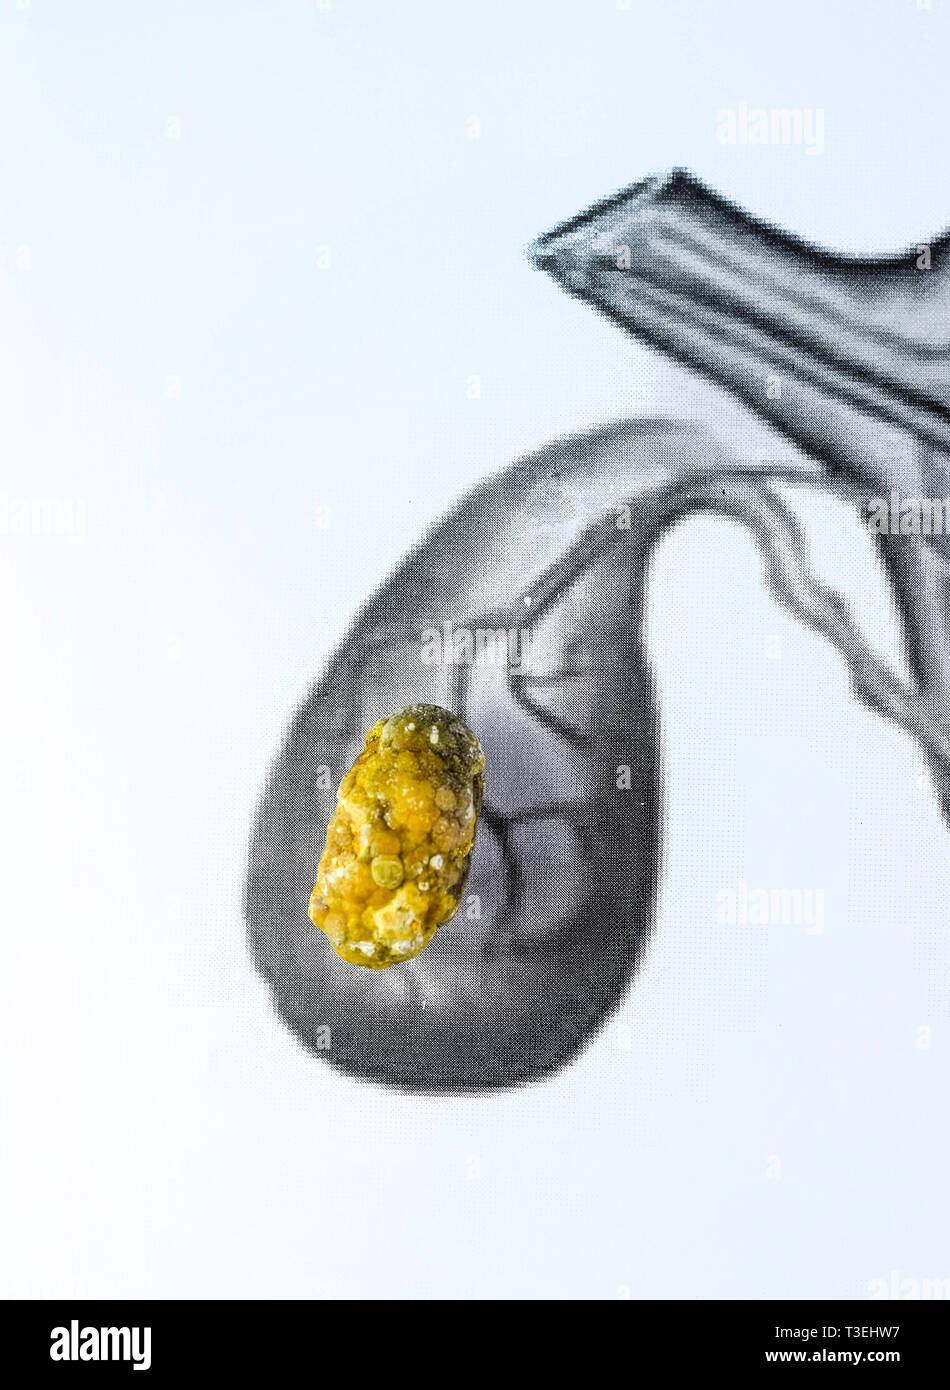 Gall bladder stone, schematic depiction, large-sized Gallstone, Result of gallstone disease. Stock Photo